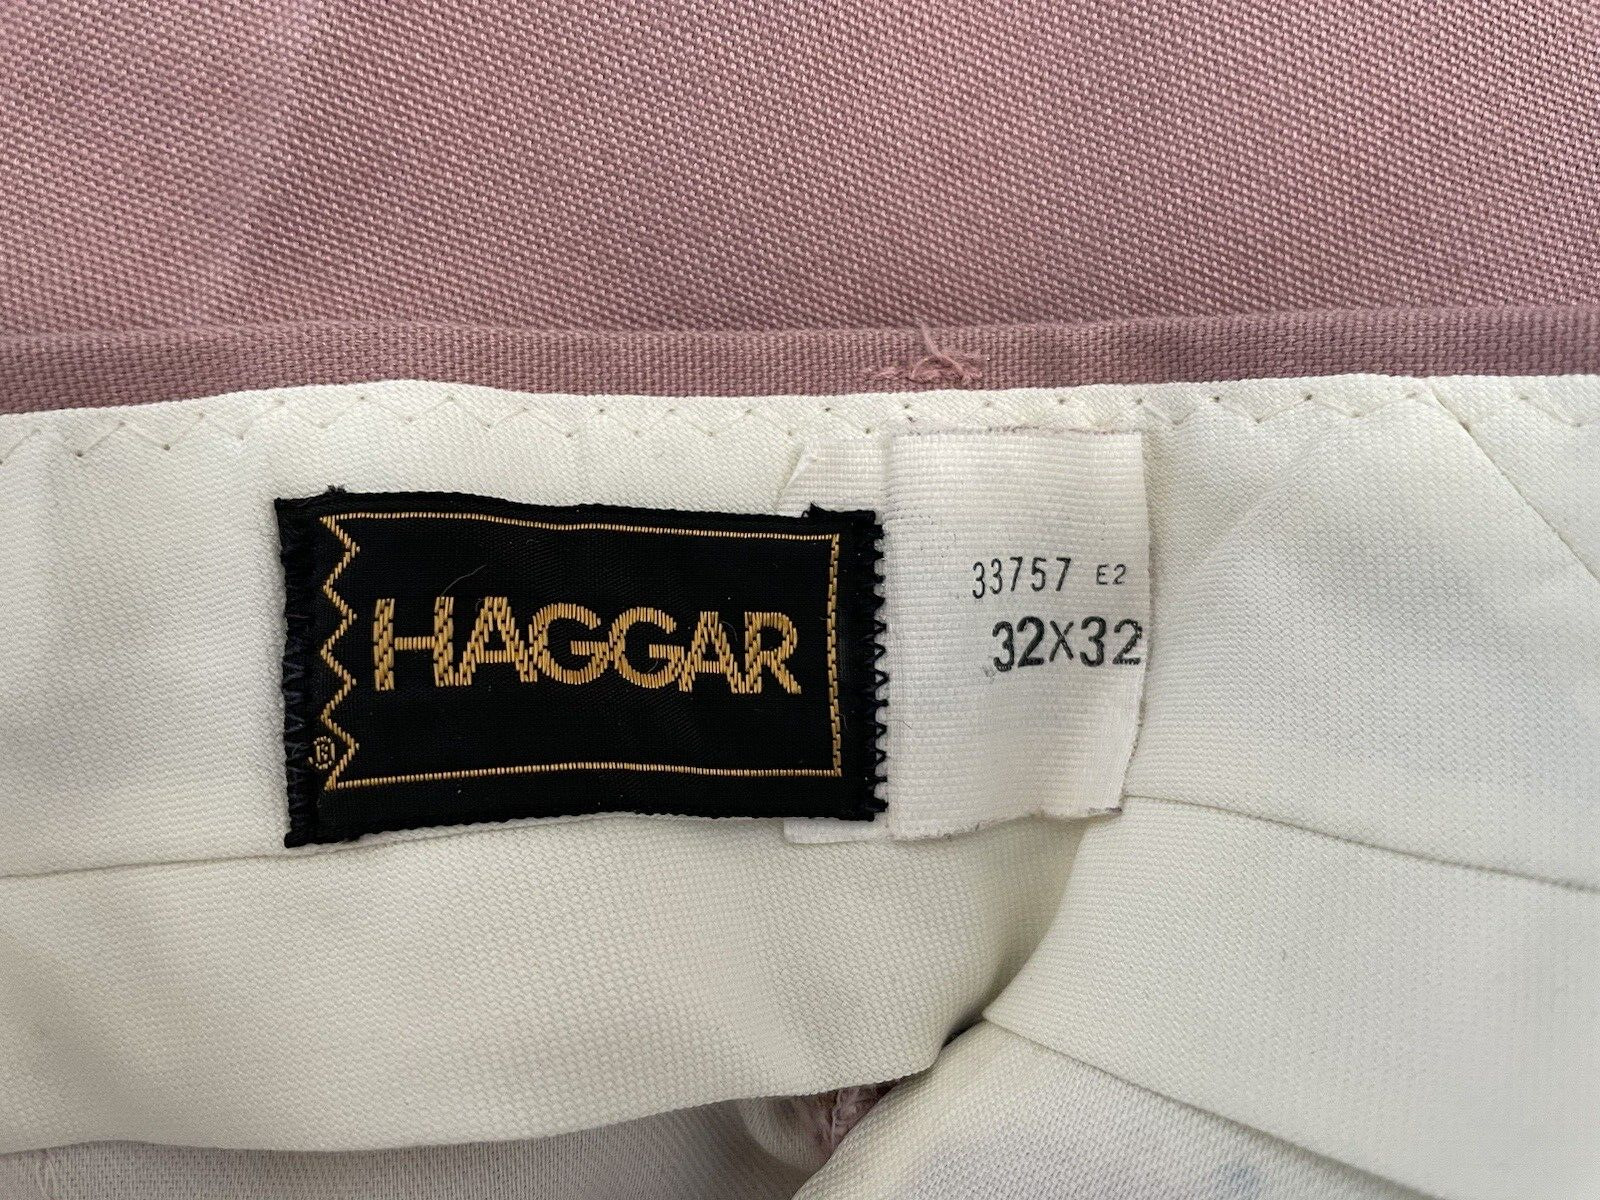 1 Pair of Pink Haggar Pants Size 32x32 with Match… - image 9